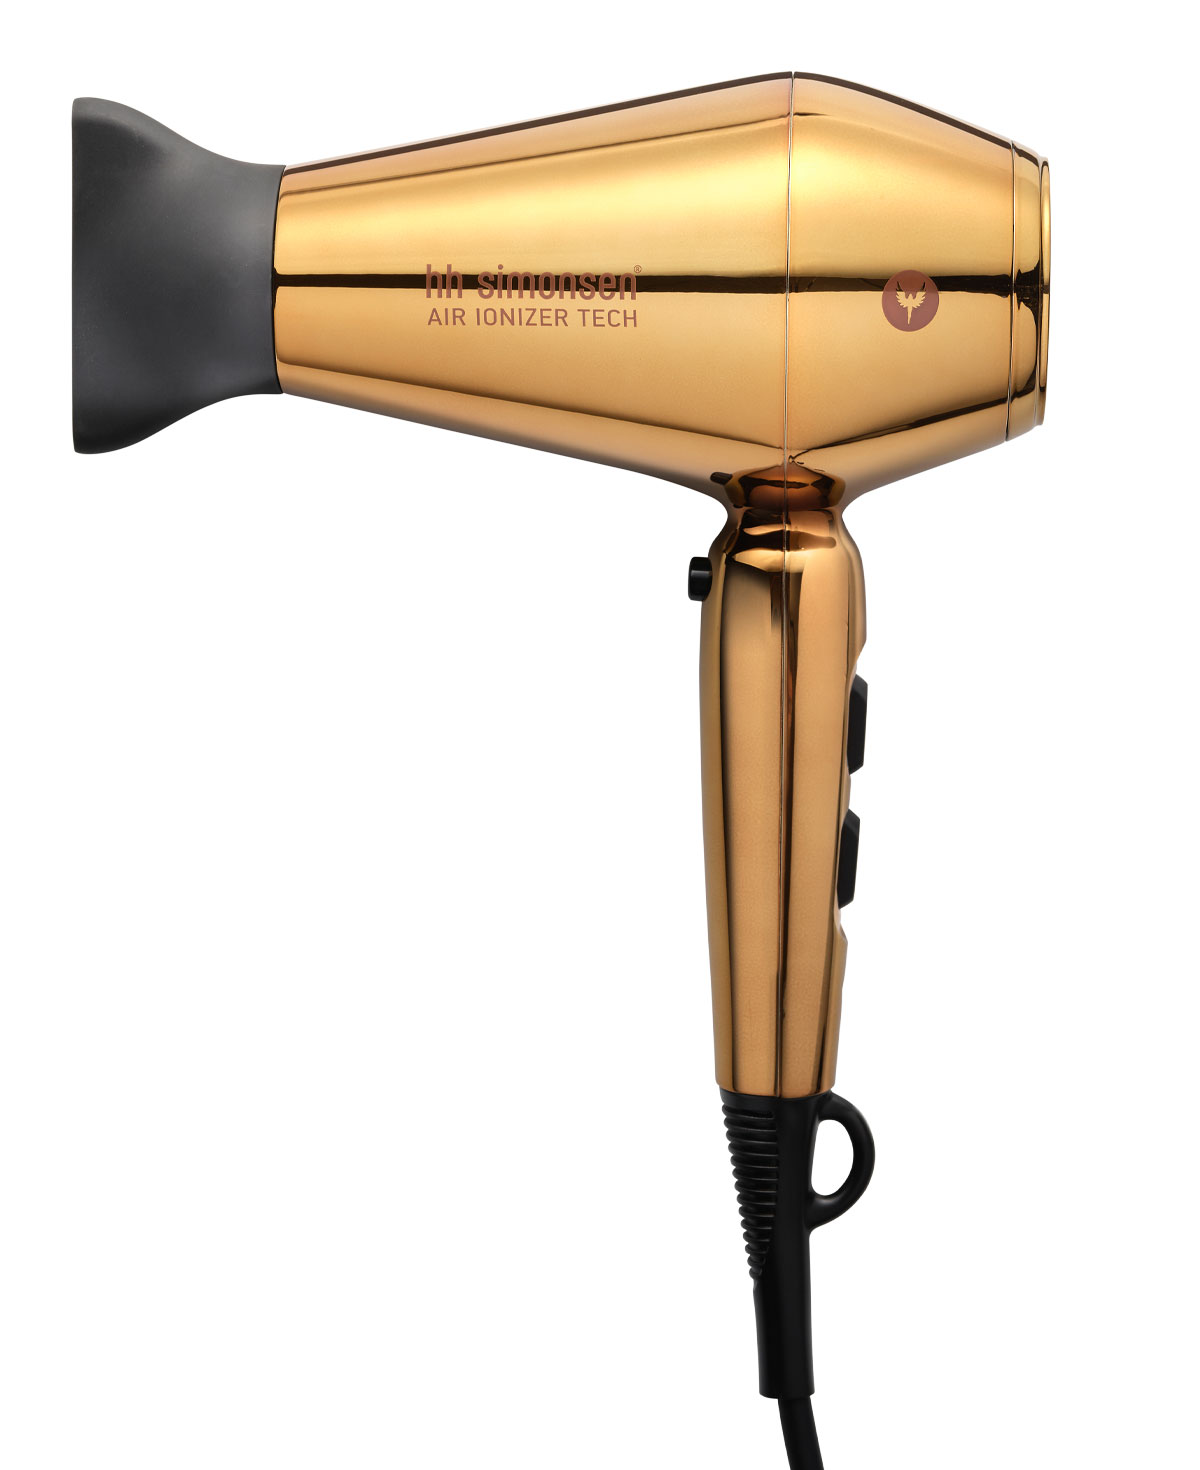 HH Simonsen Compact Dryer - Golden Delight - Limited Edition